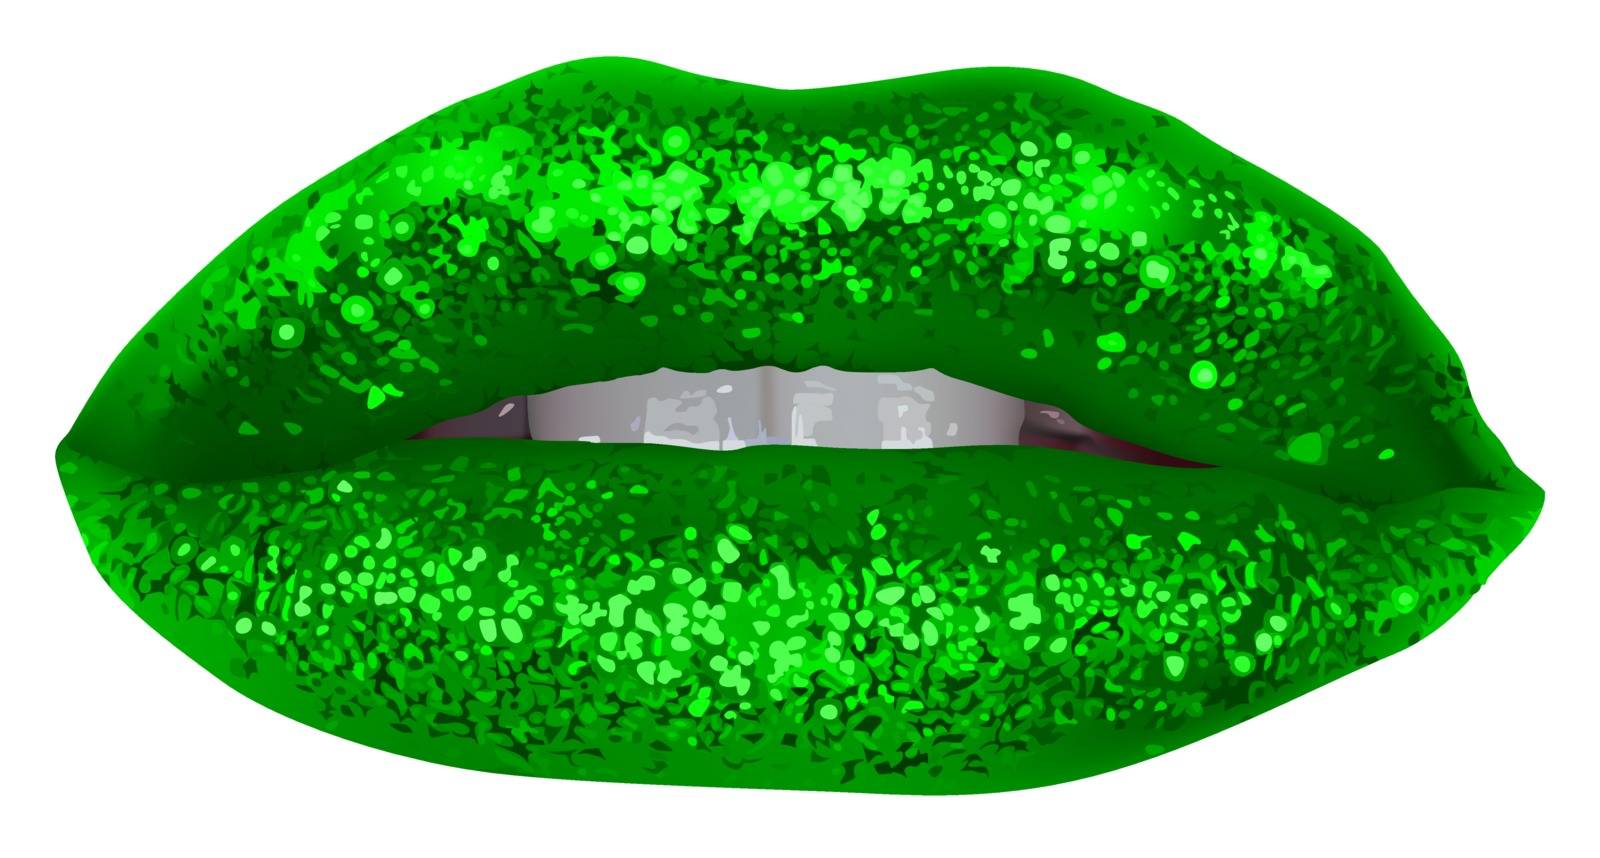 Green Lips with Glitter - Isolated and Detailed Illustration, Vector